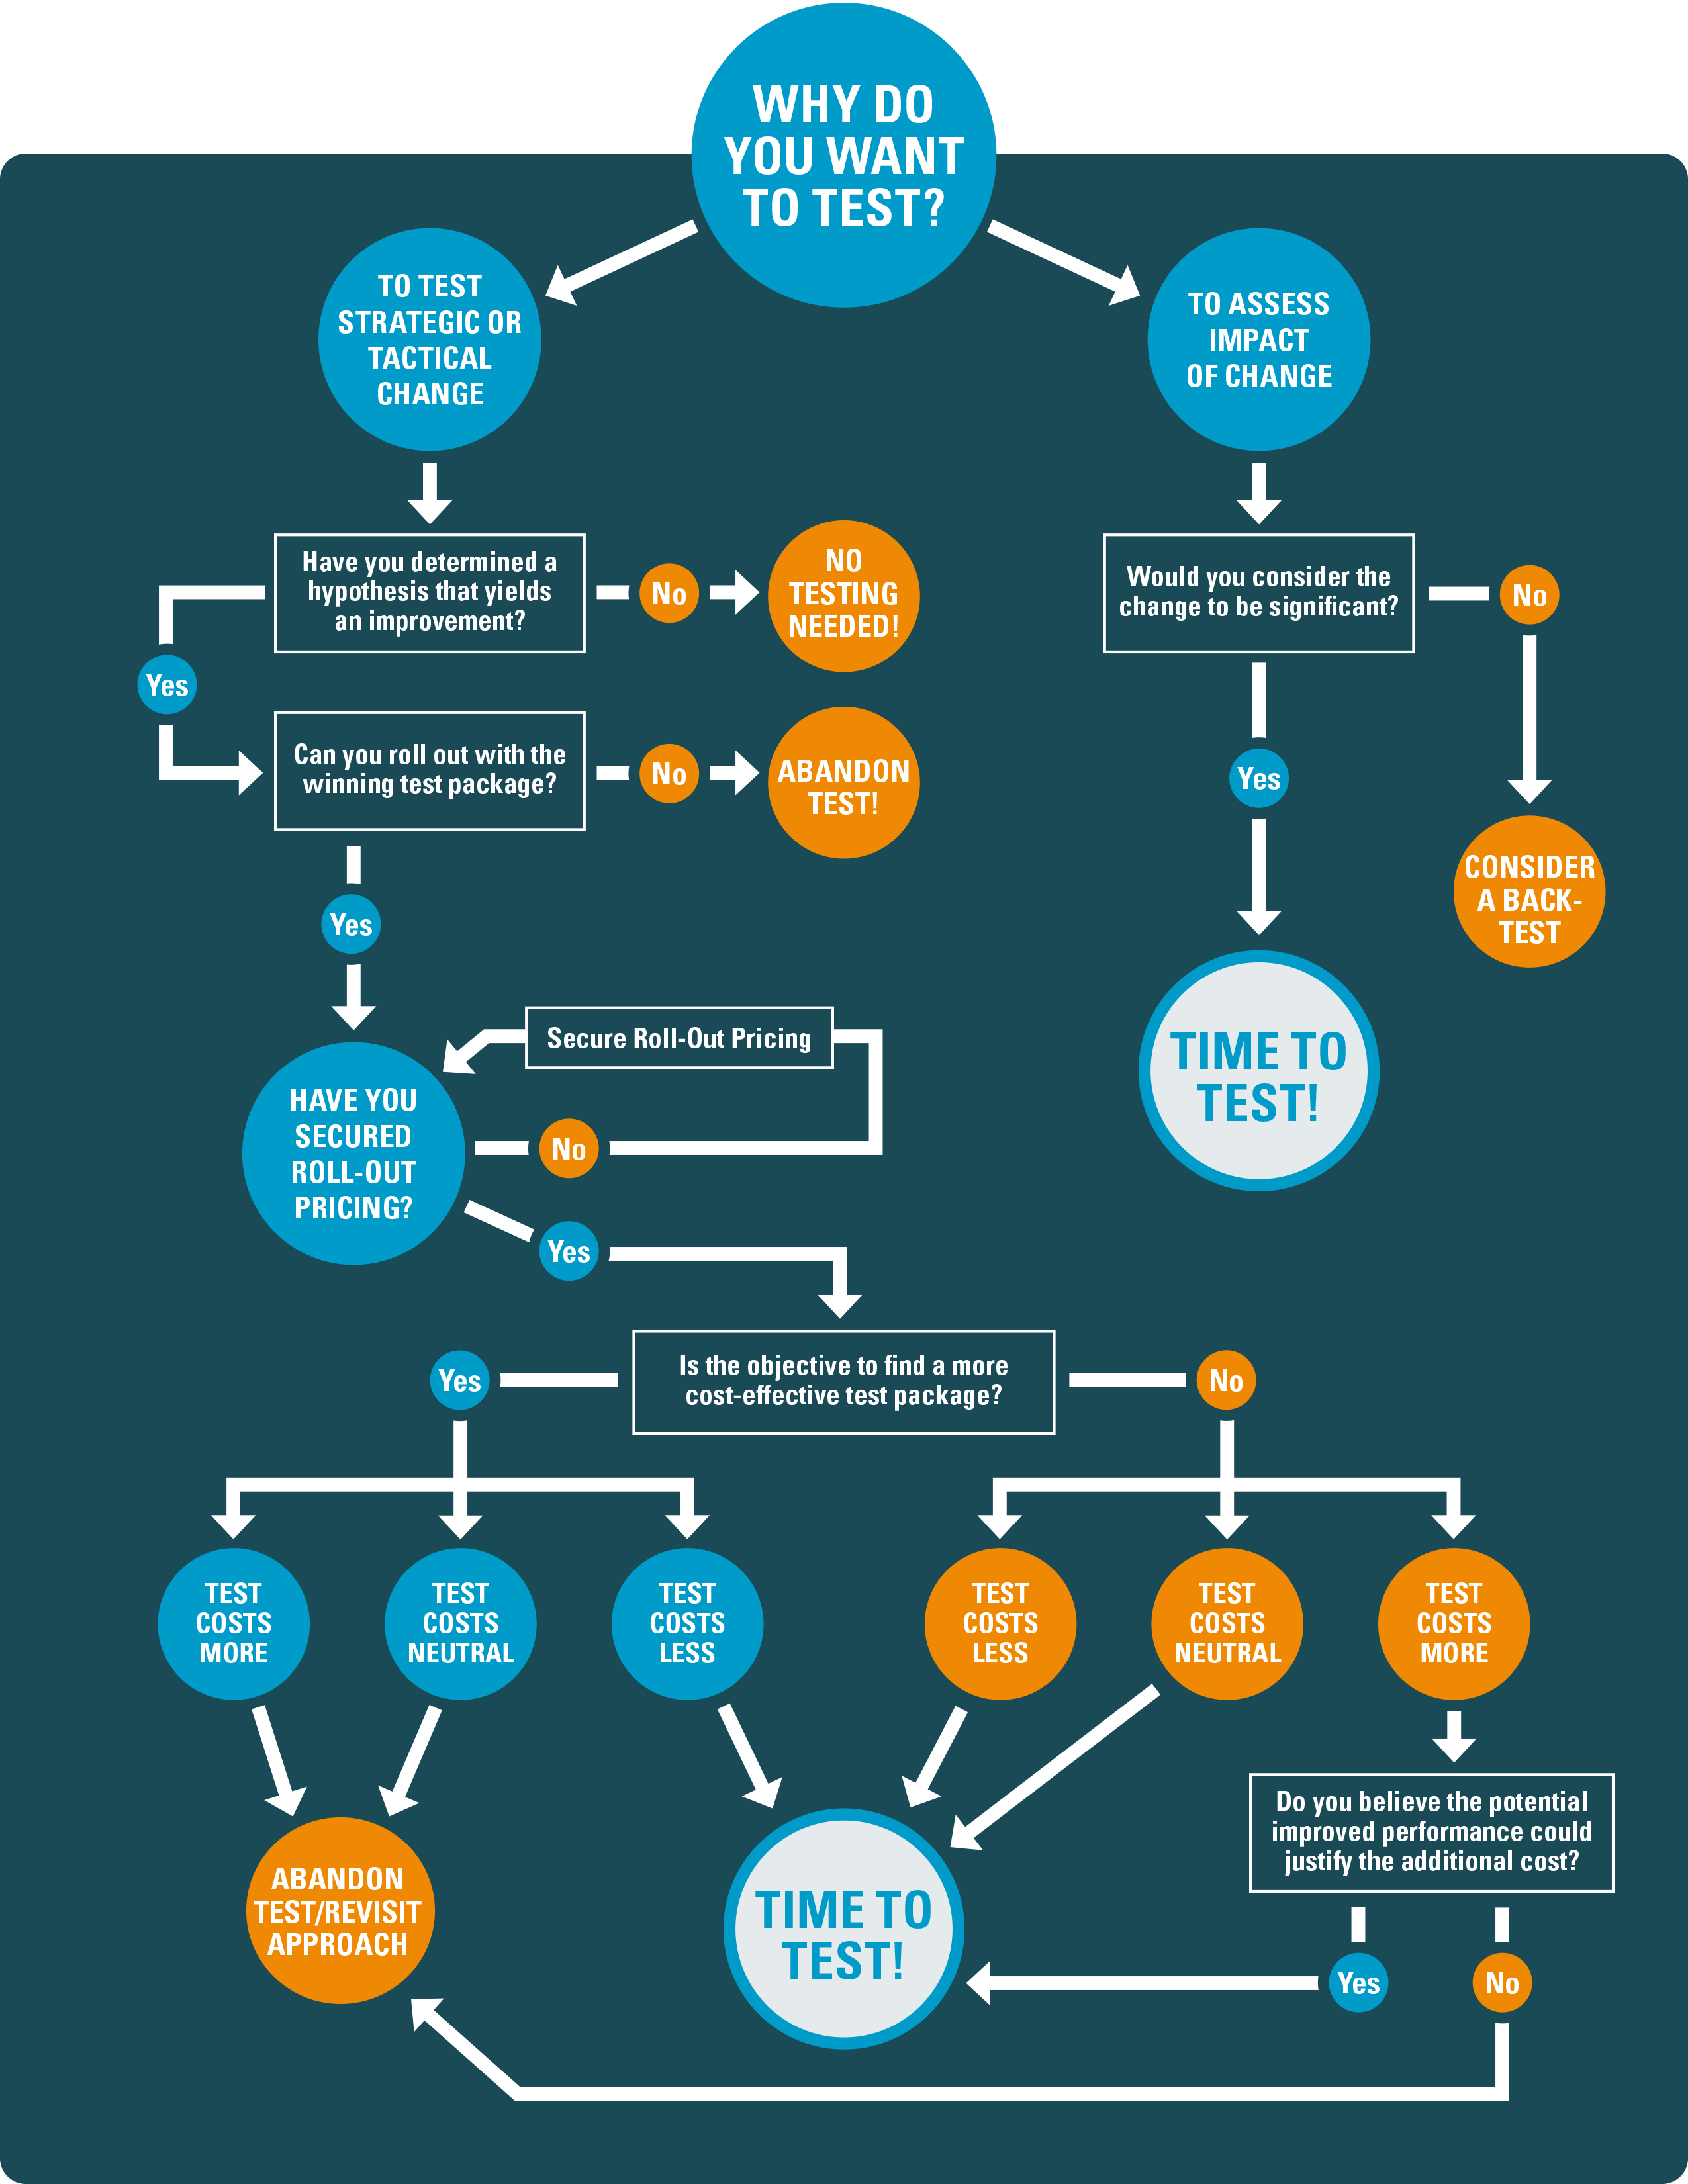 Decision Tree graphic to guide your testing process. Created by TrueSense Marketing